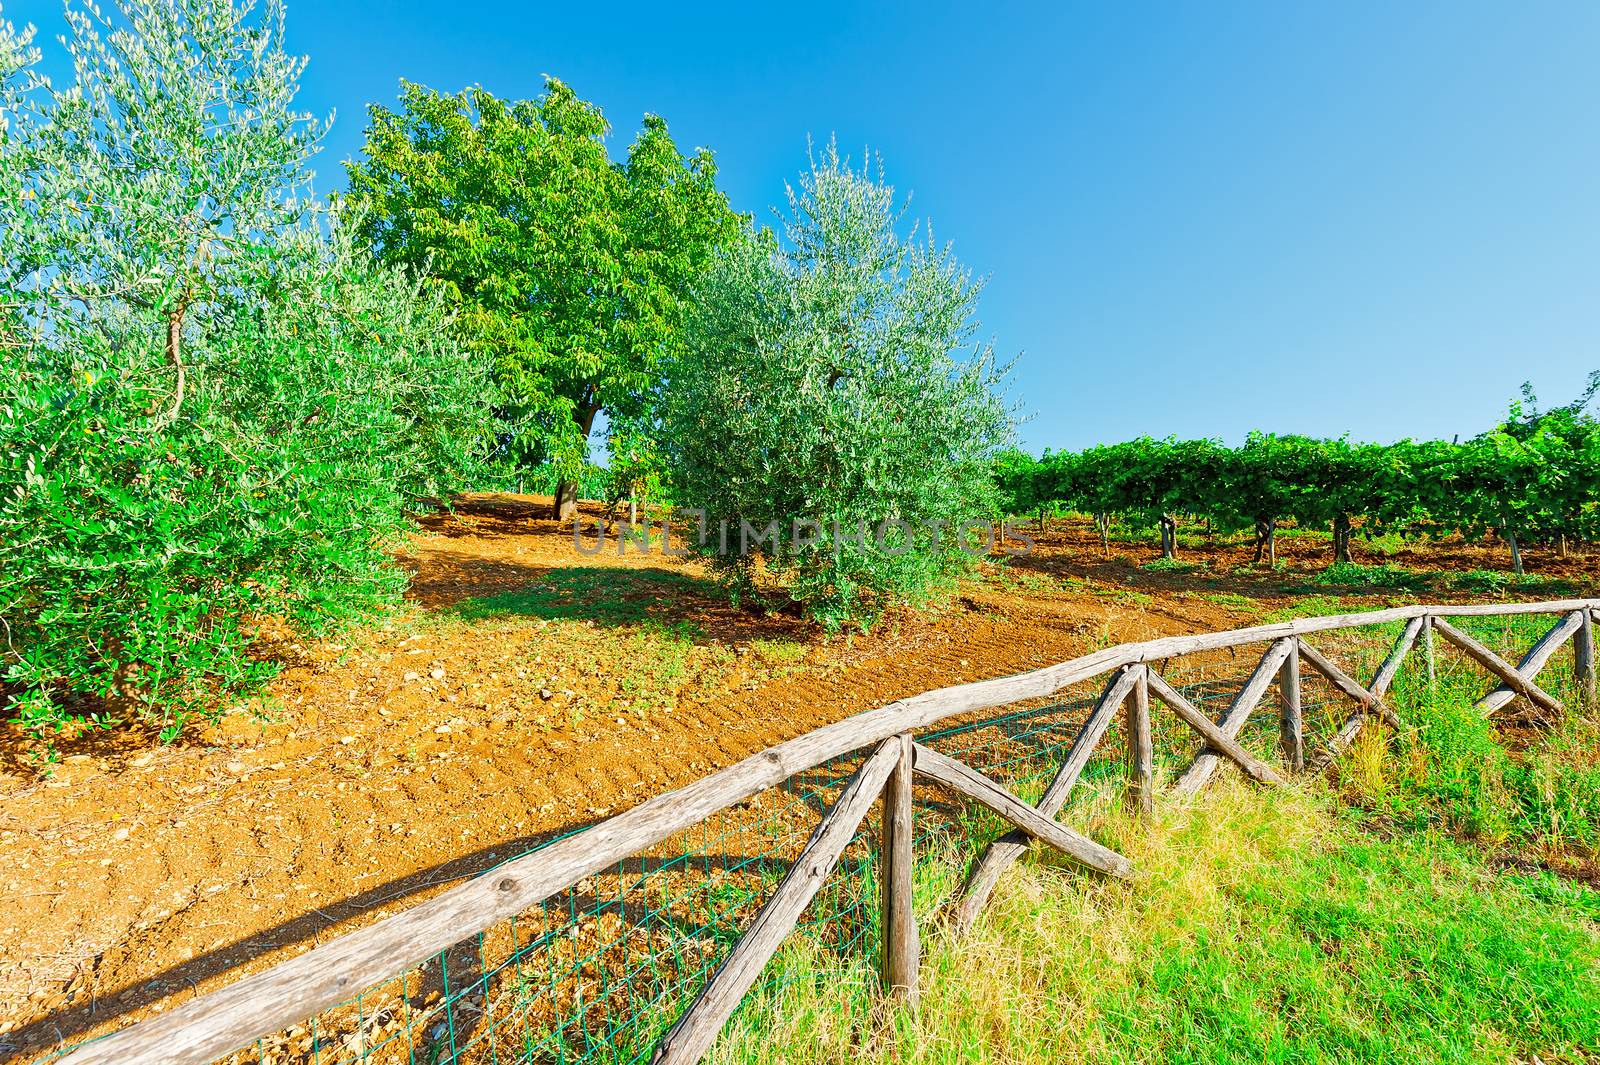 Vineyard and Olive Grove behind a Wooden Fence in Italy